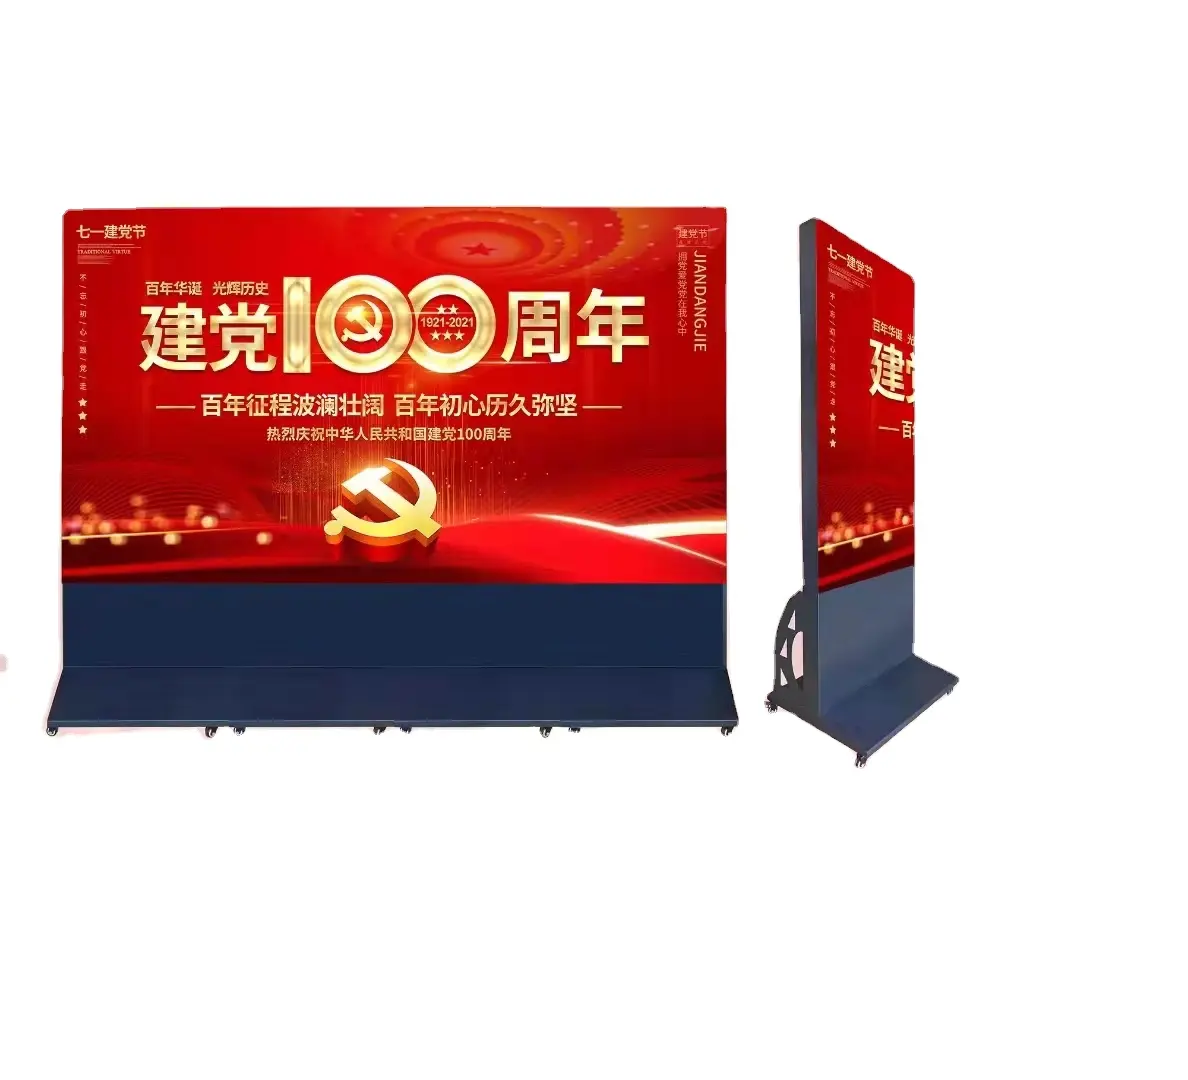 High Refresh High definition full color hot sell GOB indoor P1.53 advertising screen led display